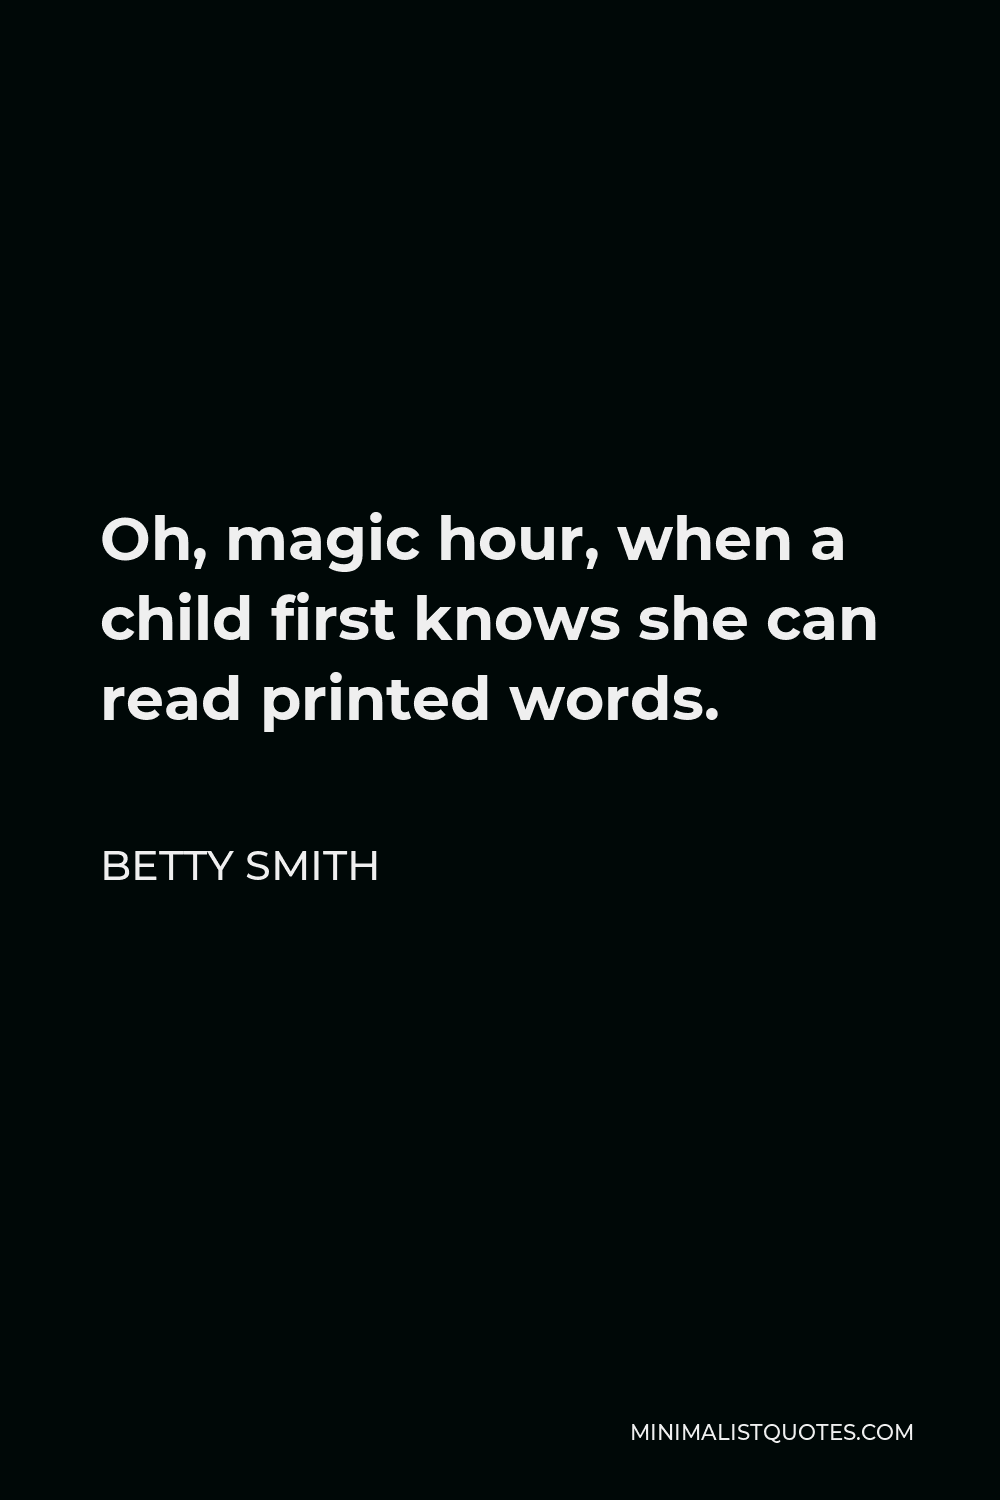 Betty Smith Quote - Oh, magic hour, when a child first knows she can read printed words.